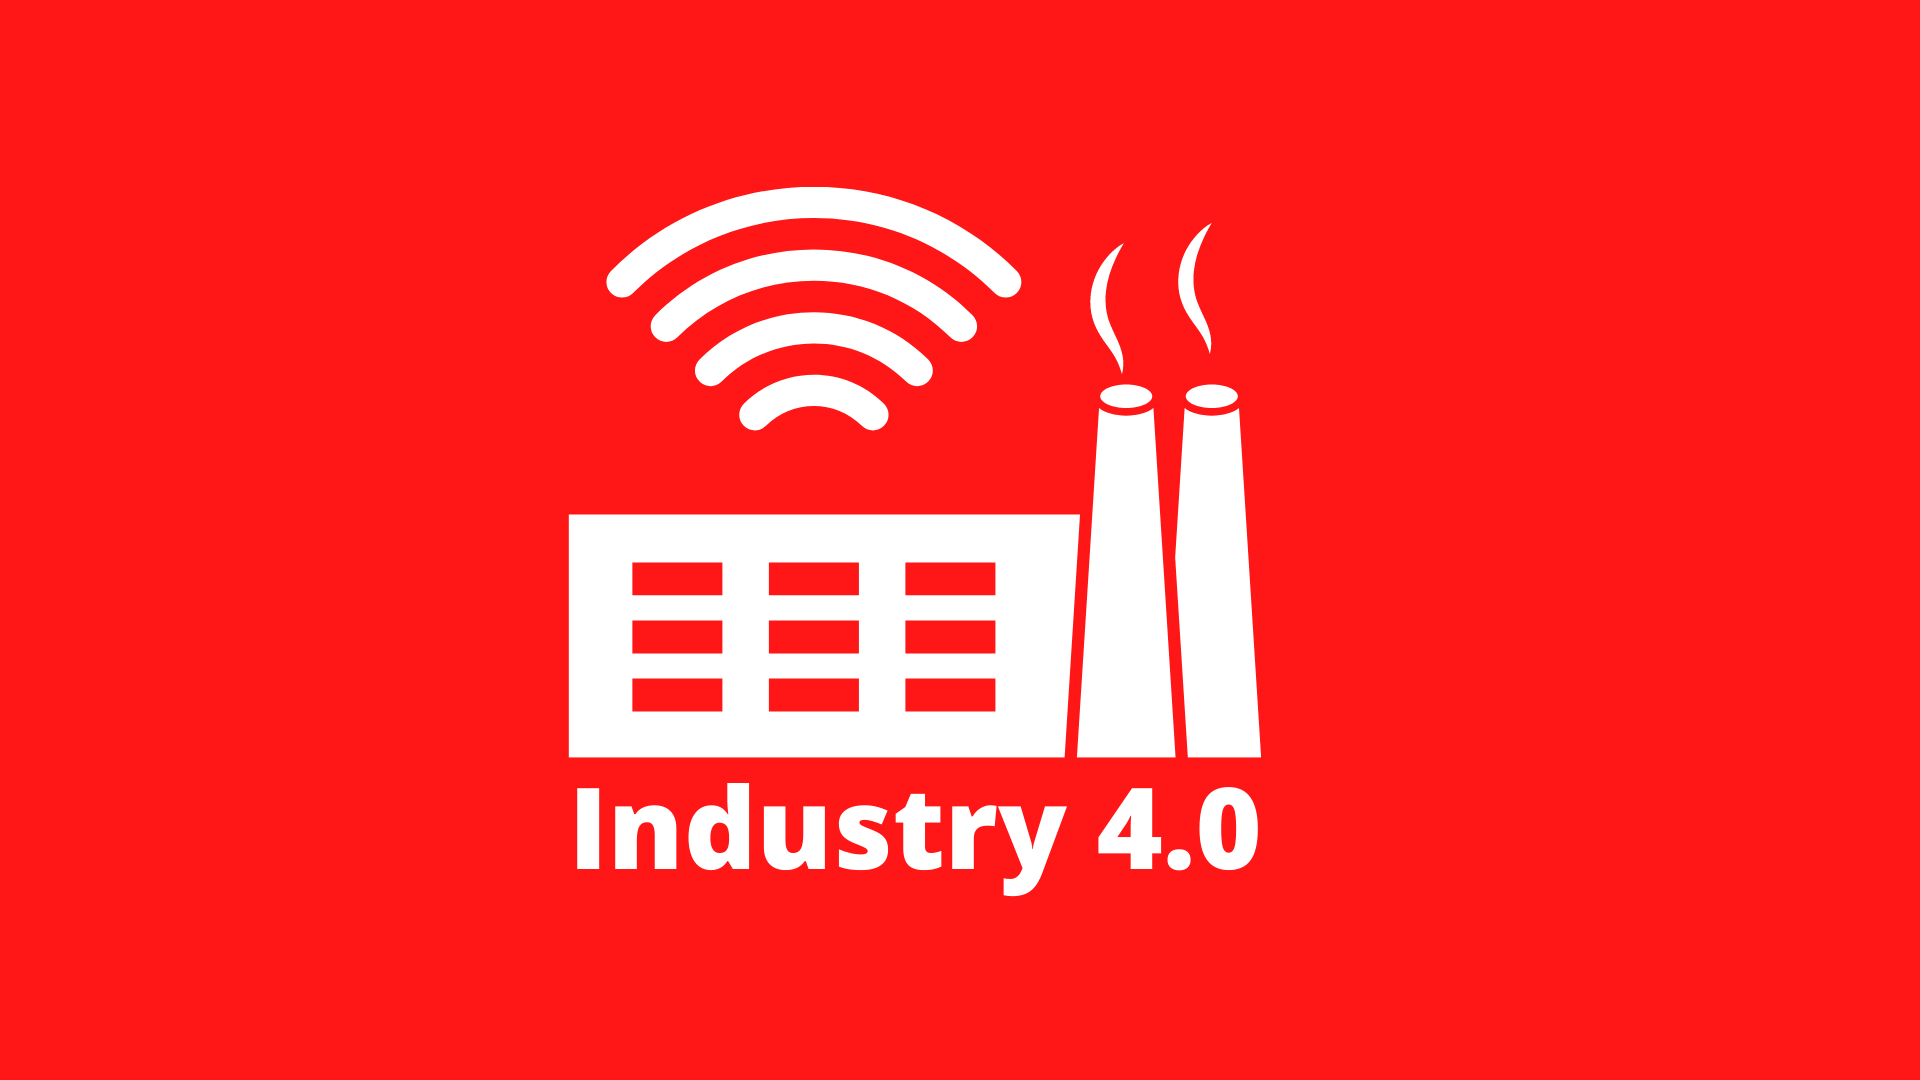 Industry 4.0 graphic.